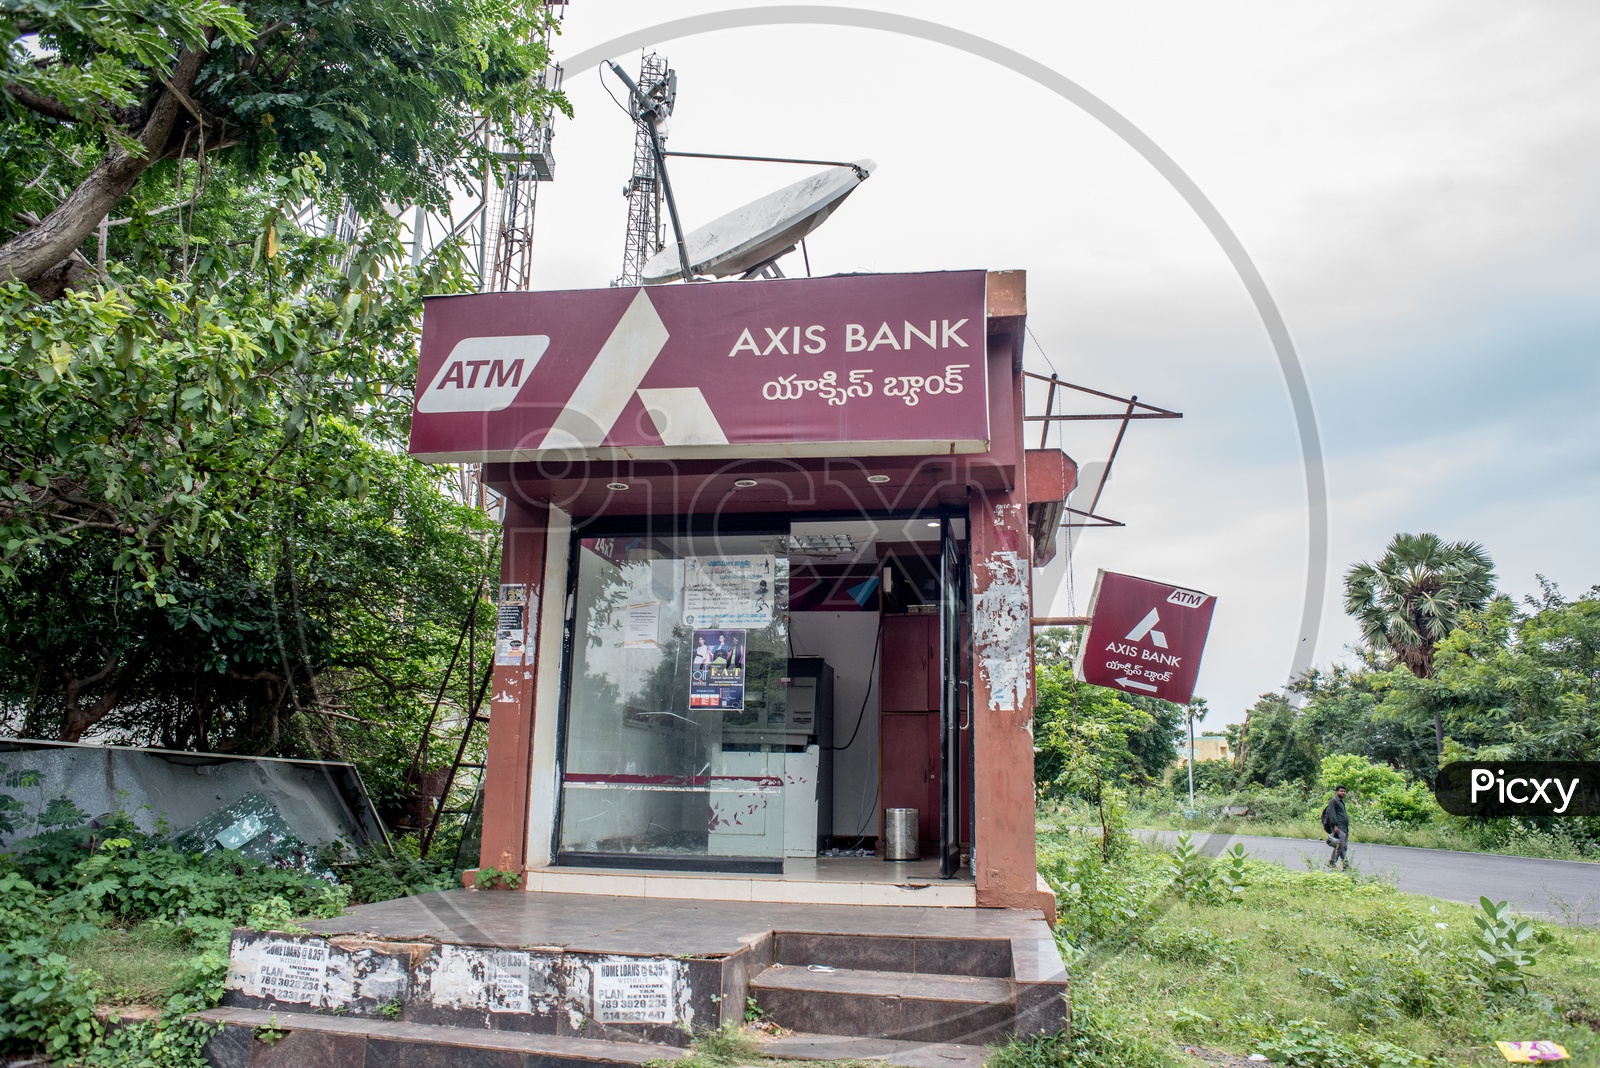 Axis bank ATM in steel plant